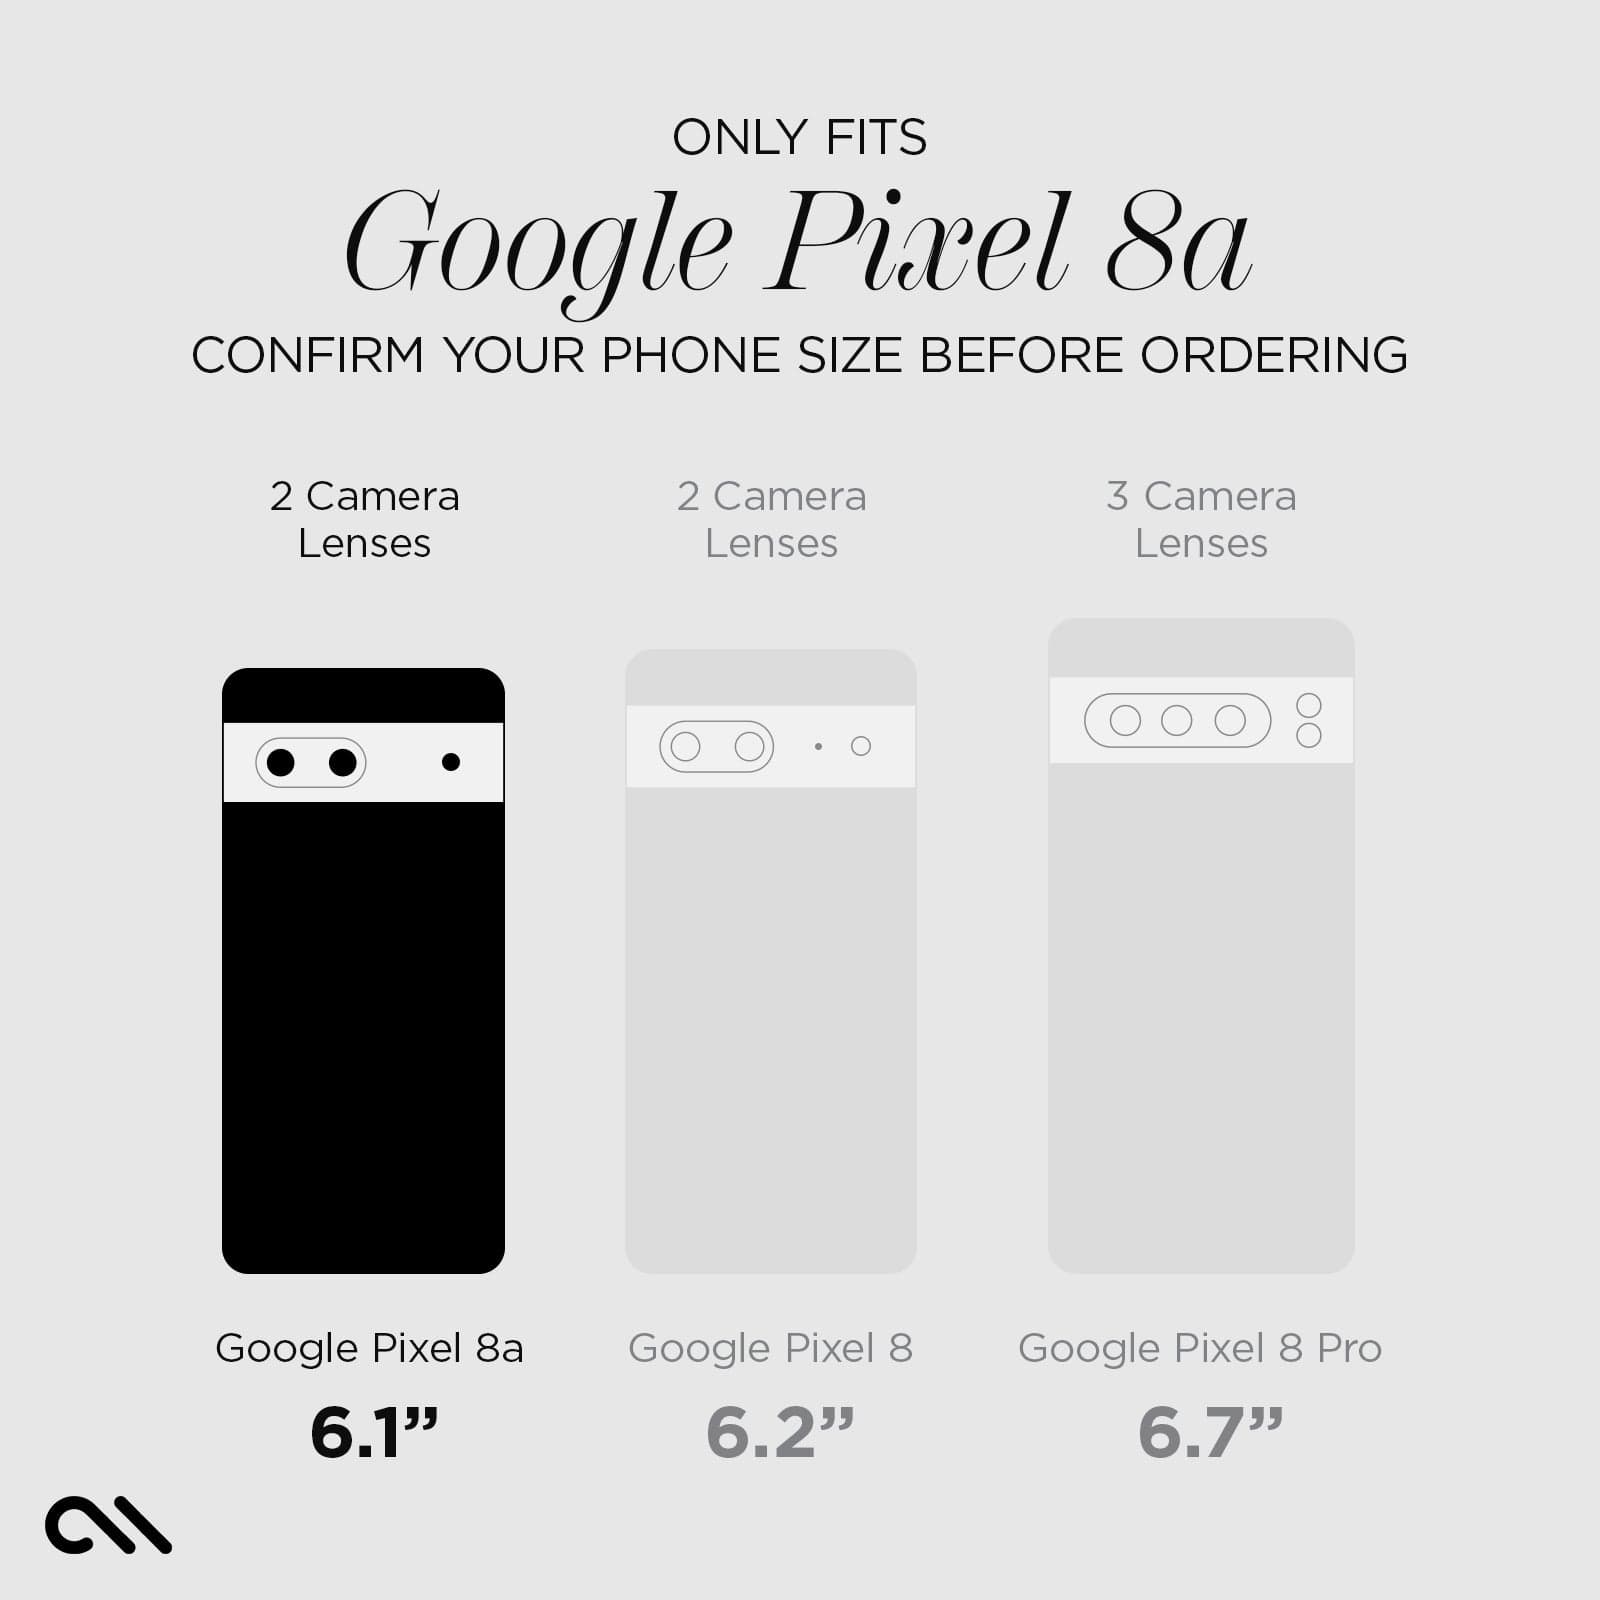 only fits google pixel 8a confirm your phone size before ordering